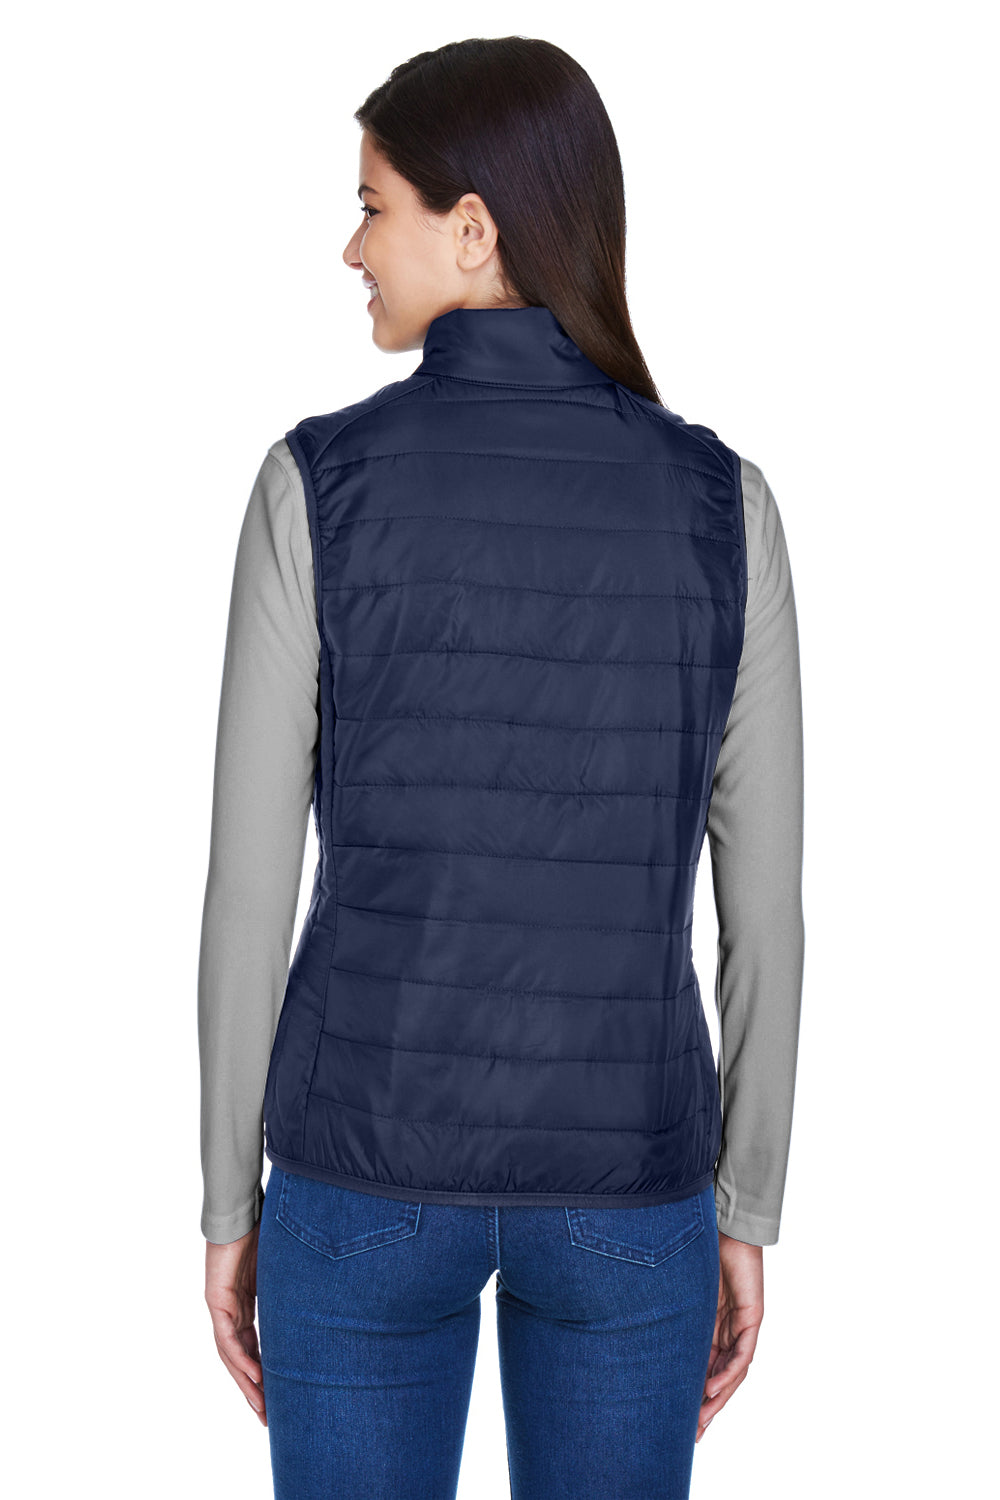 Core 365 CE702W Womens Prevail Packable Puffer Water Resistant Full Zip Vest Navy Blue Back